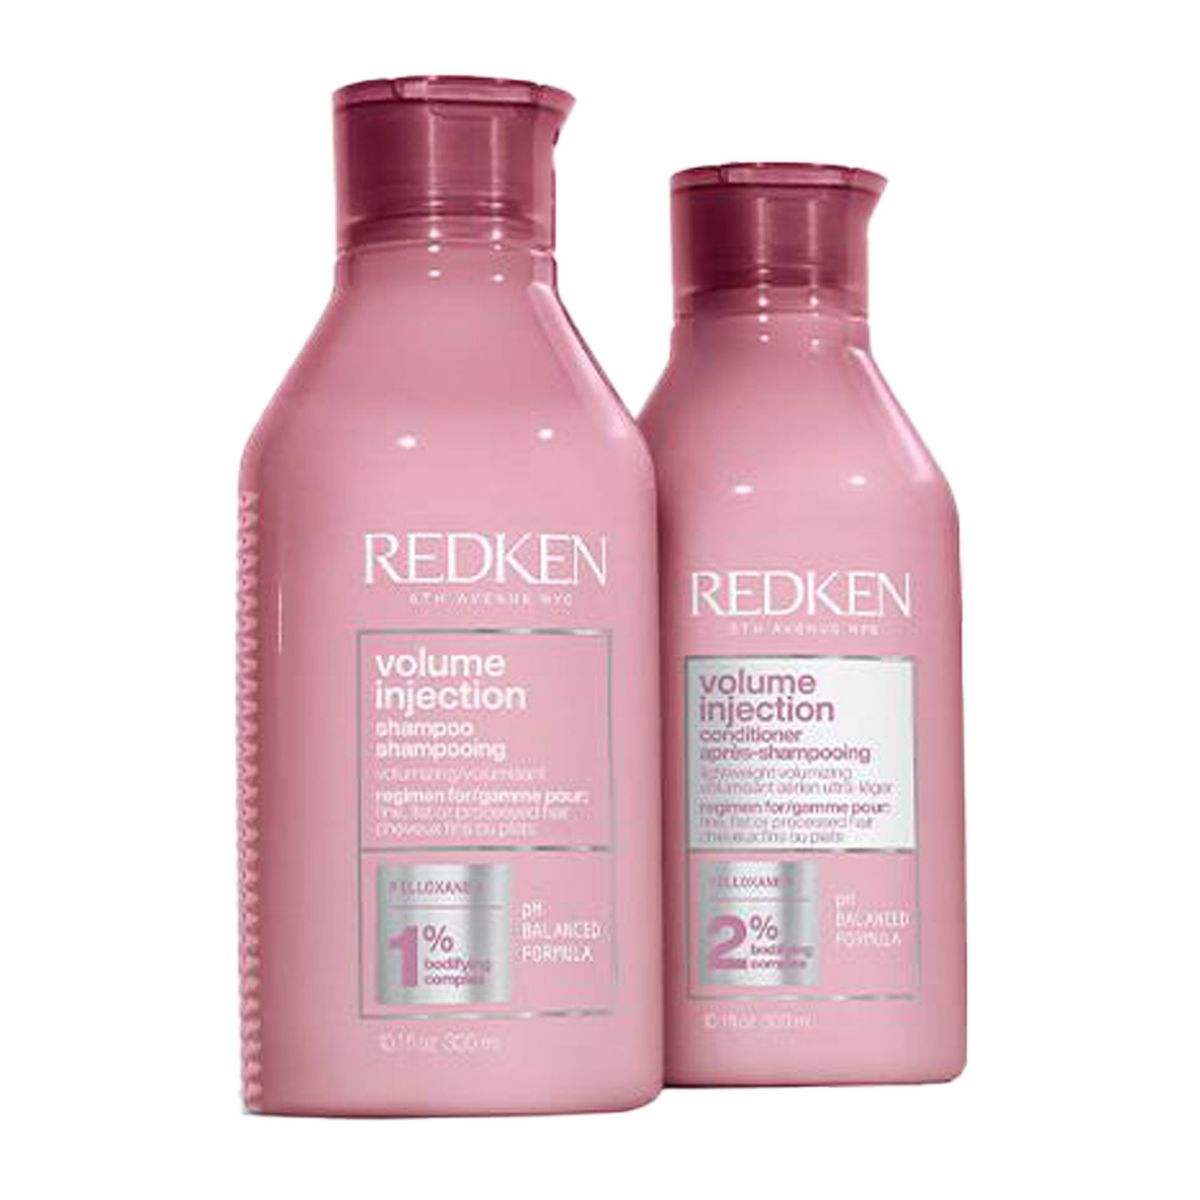 Redken-Volume-Injection-Shampoo-Conditioner-Hold-The-Heat-Products